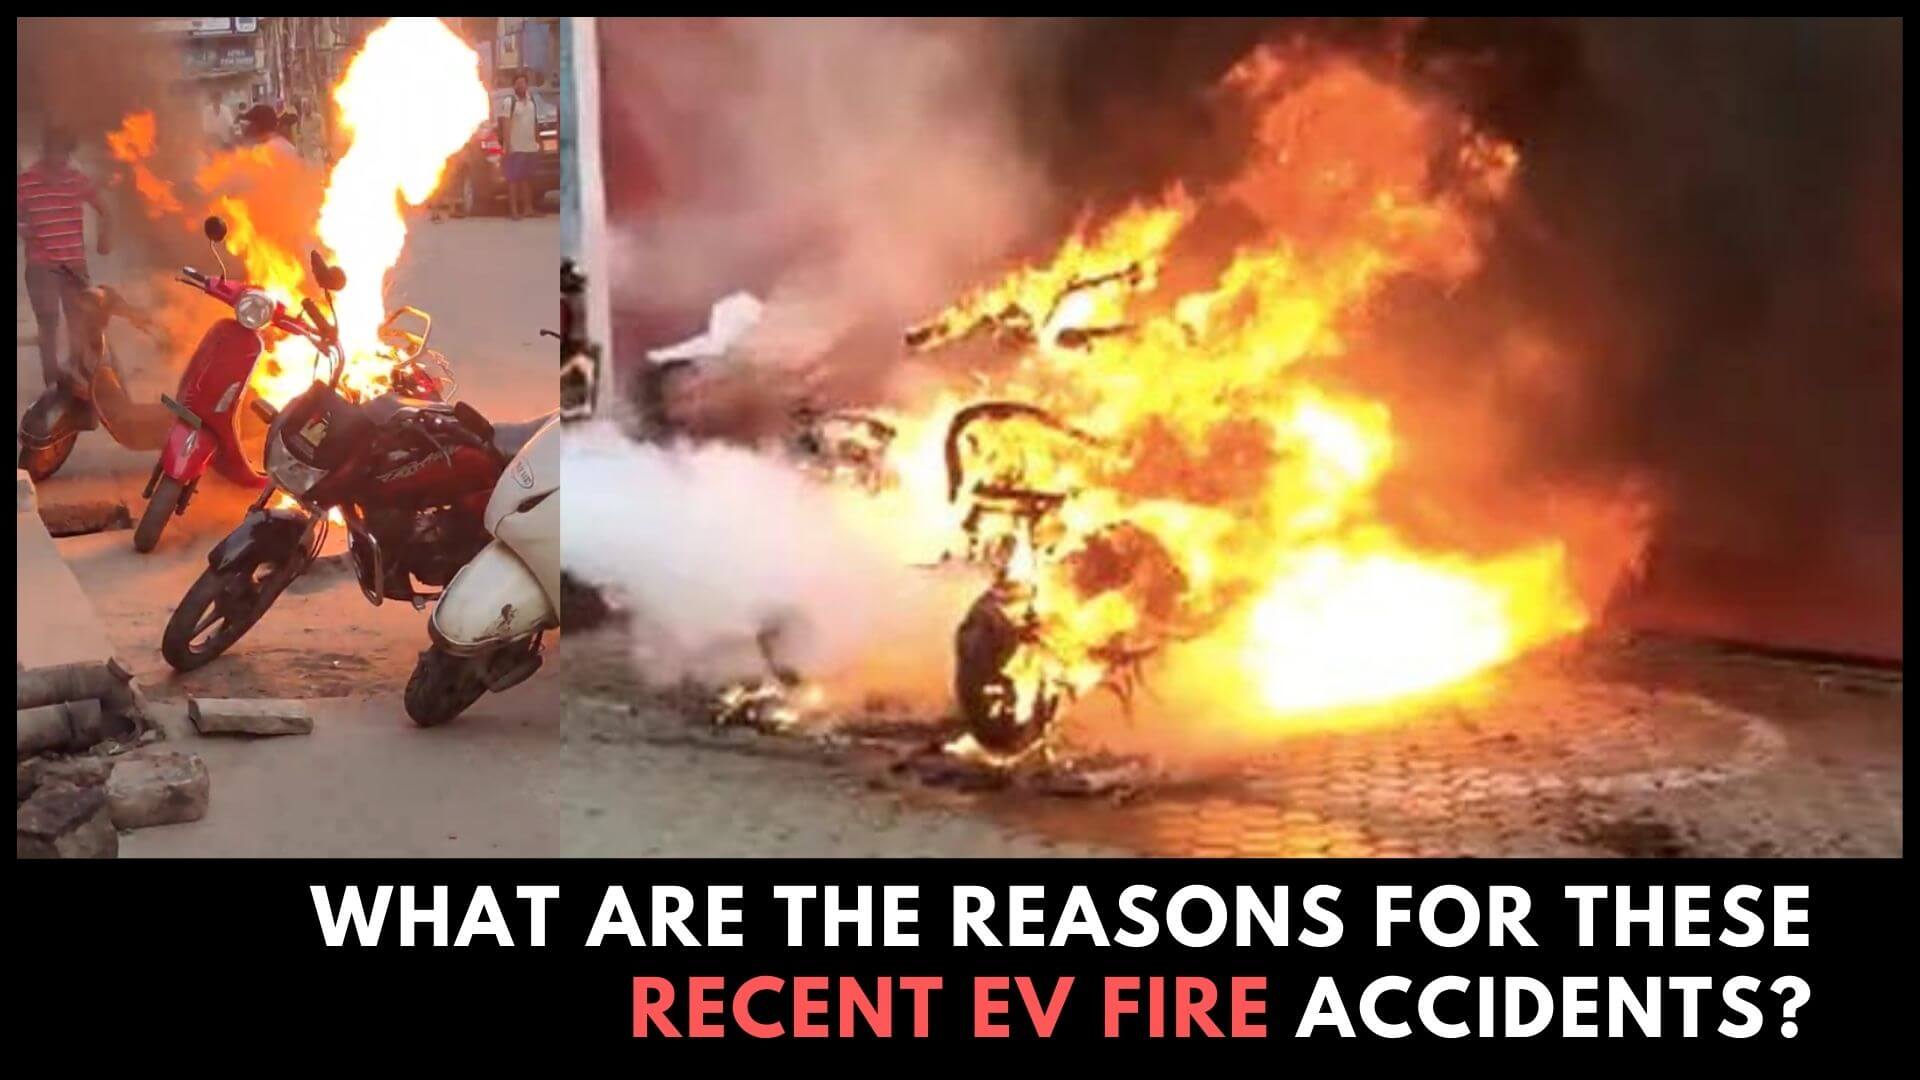 https://e-vehicleinfo.com/what-are-the-reasons-for-these-recent-ev-fire-accidents/